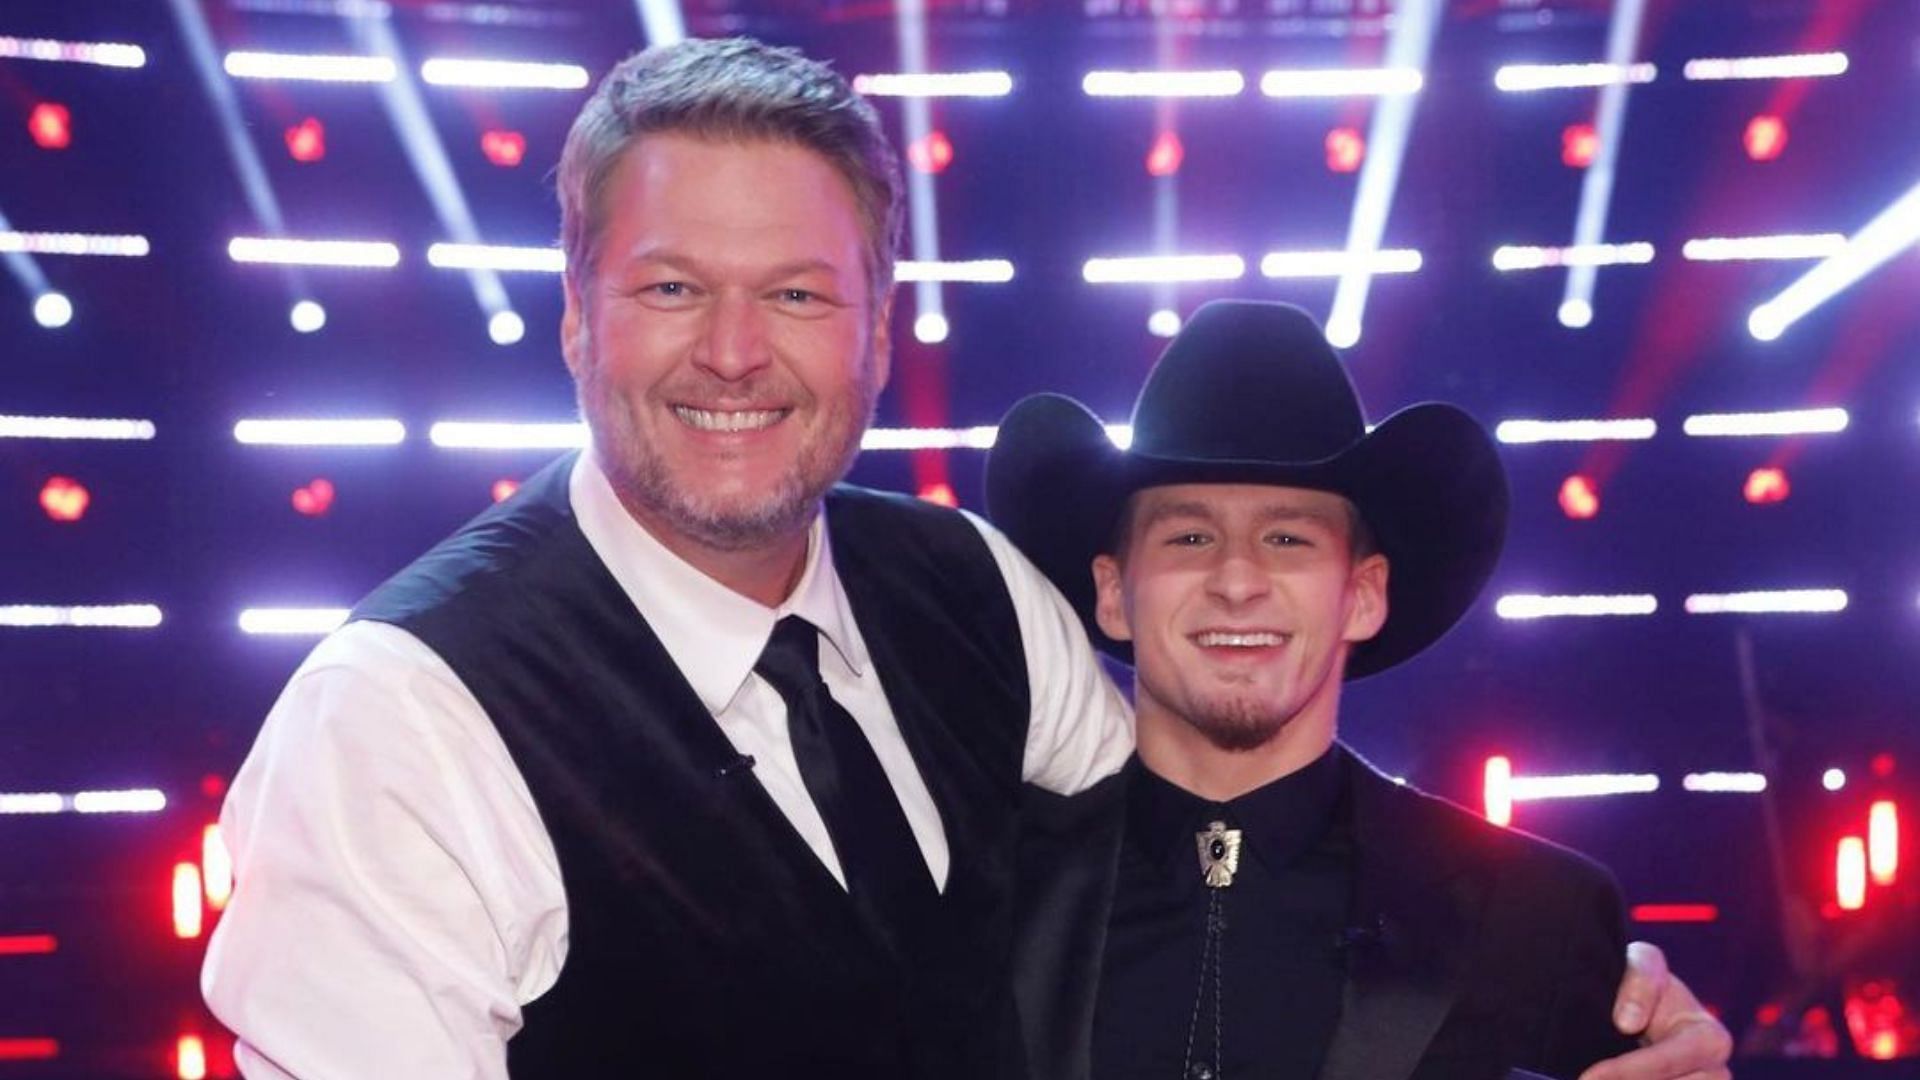 Blake and Bryce from The Voice (Image via Instagram/@Blakeshelton)